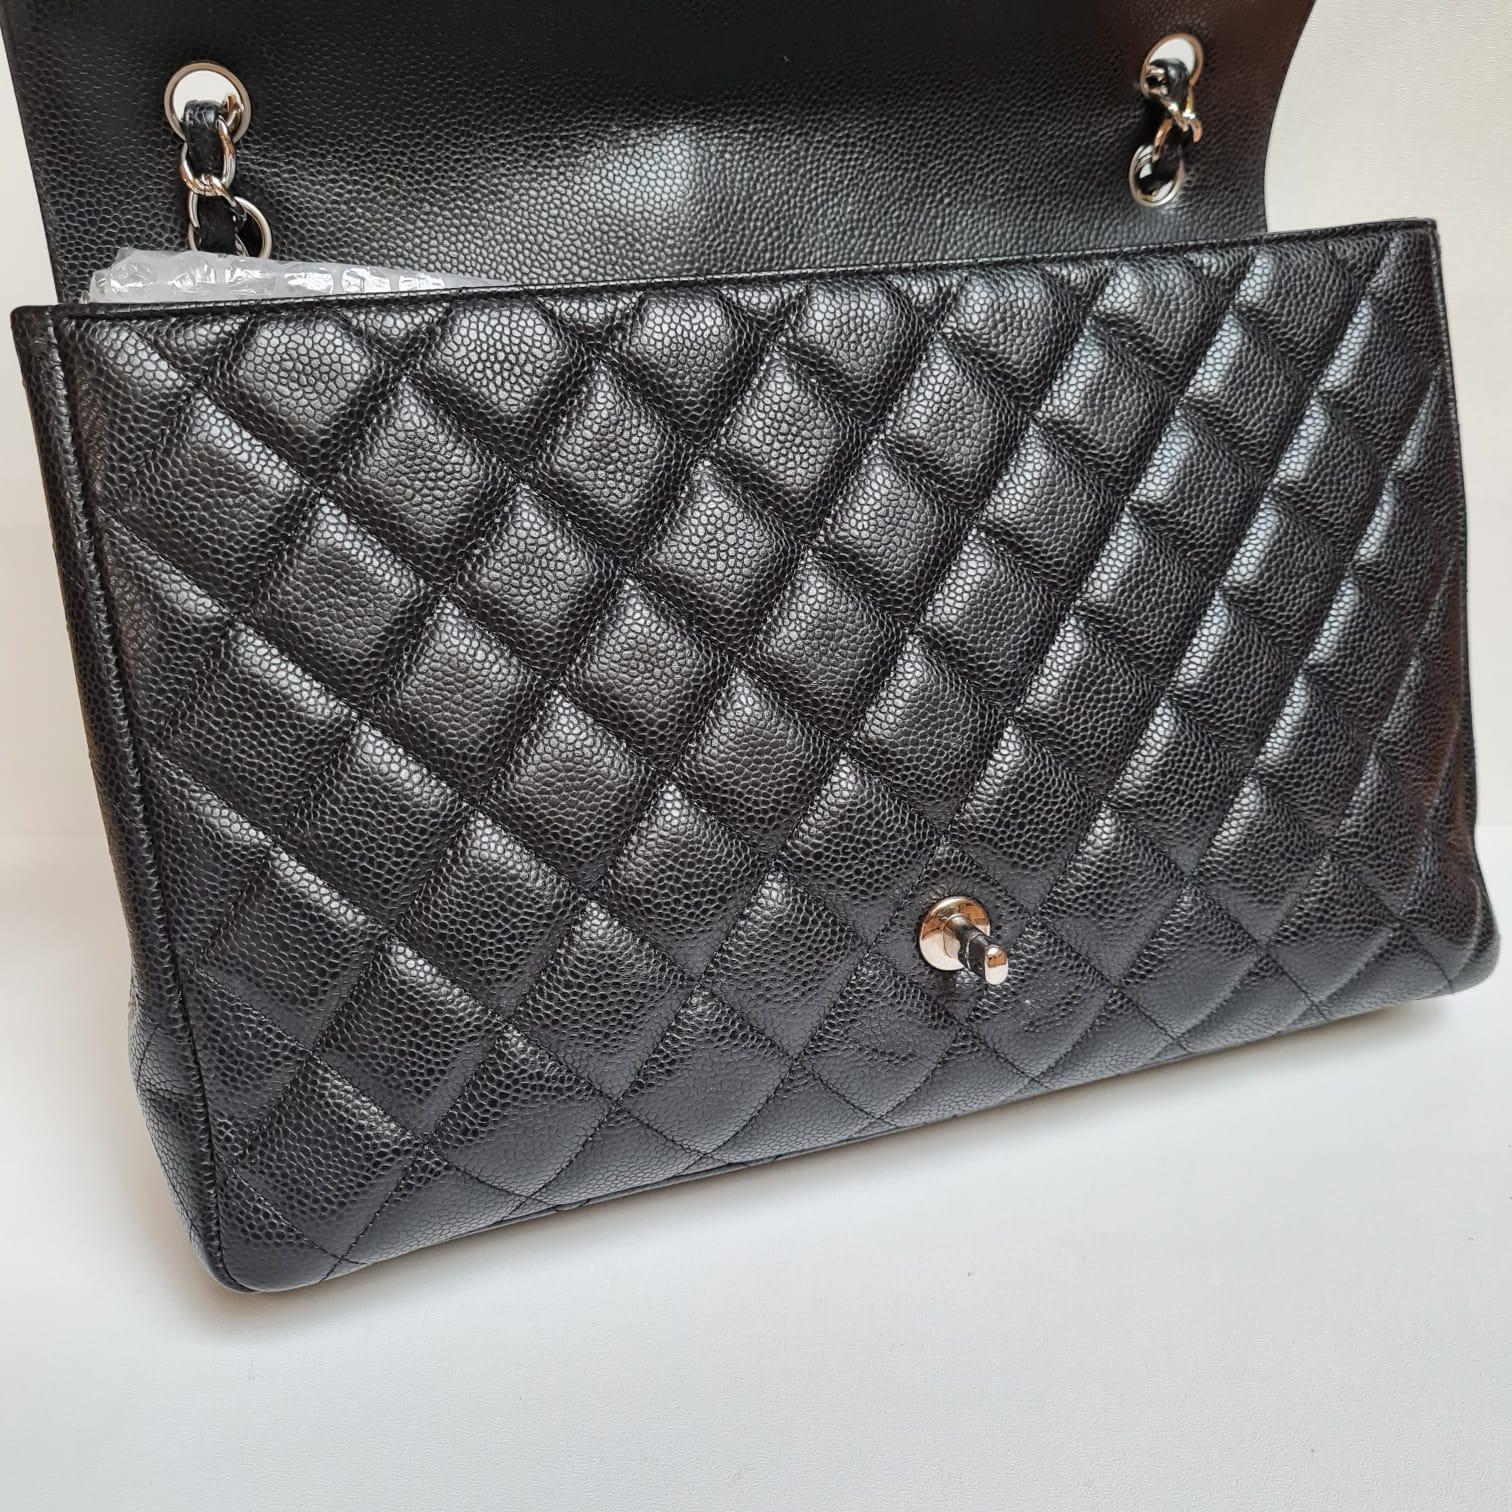 Chanel Black Maxi Caviar Leather Quilted Single Flap Bag 2